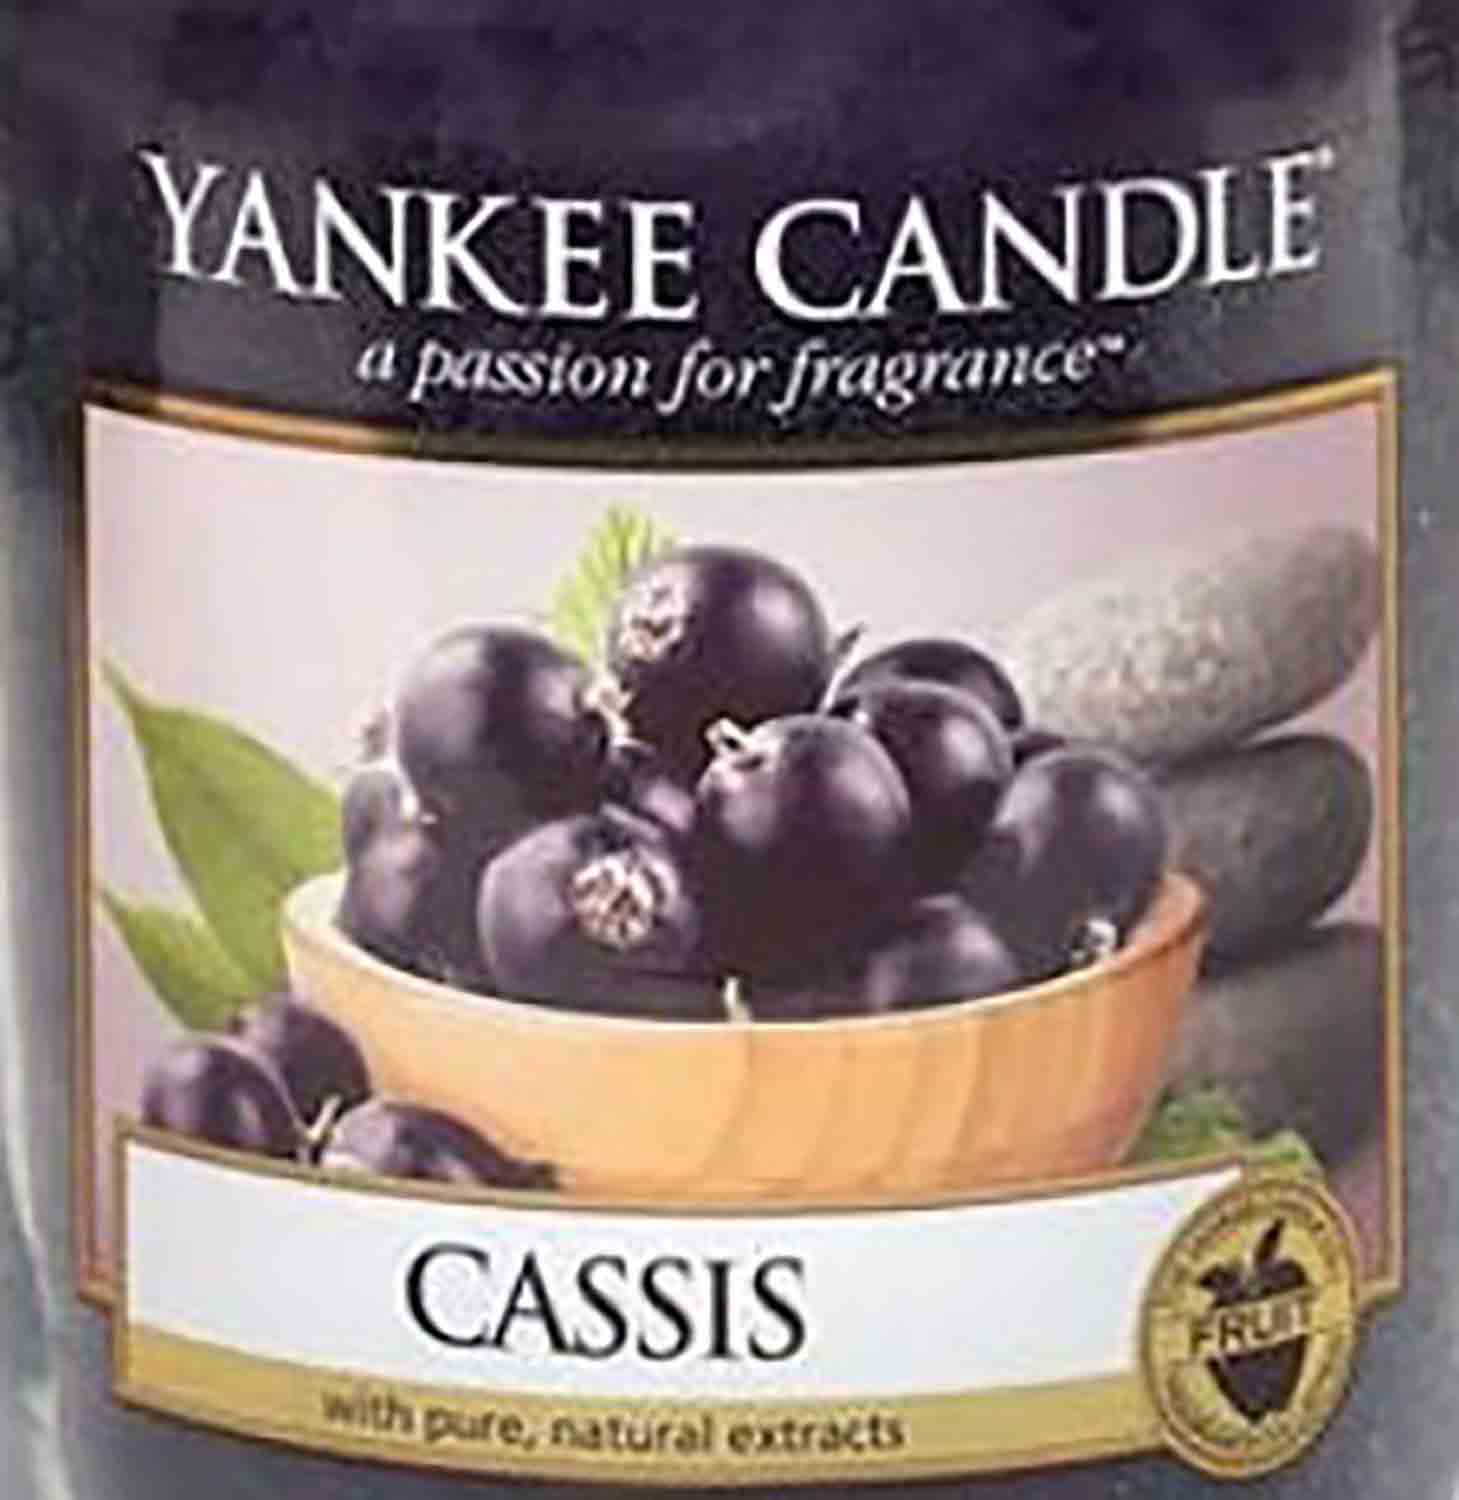 Yankee Candle Cassis 22g - Crumble vosk